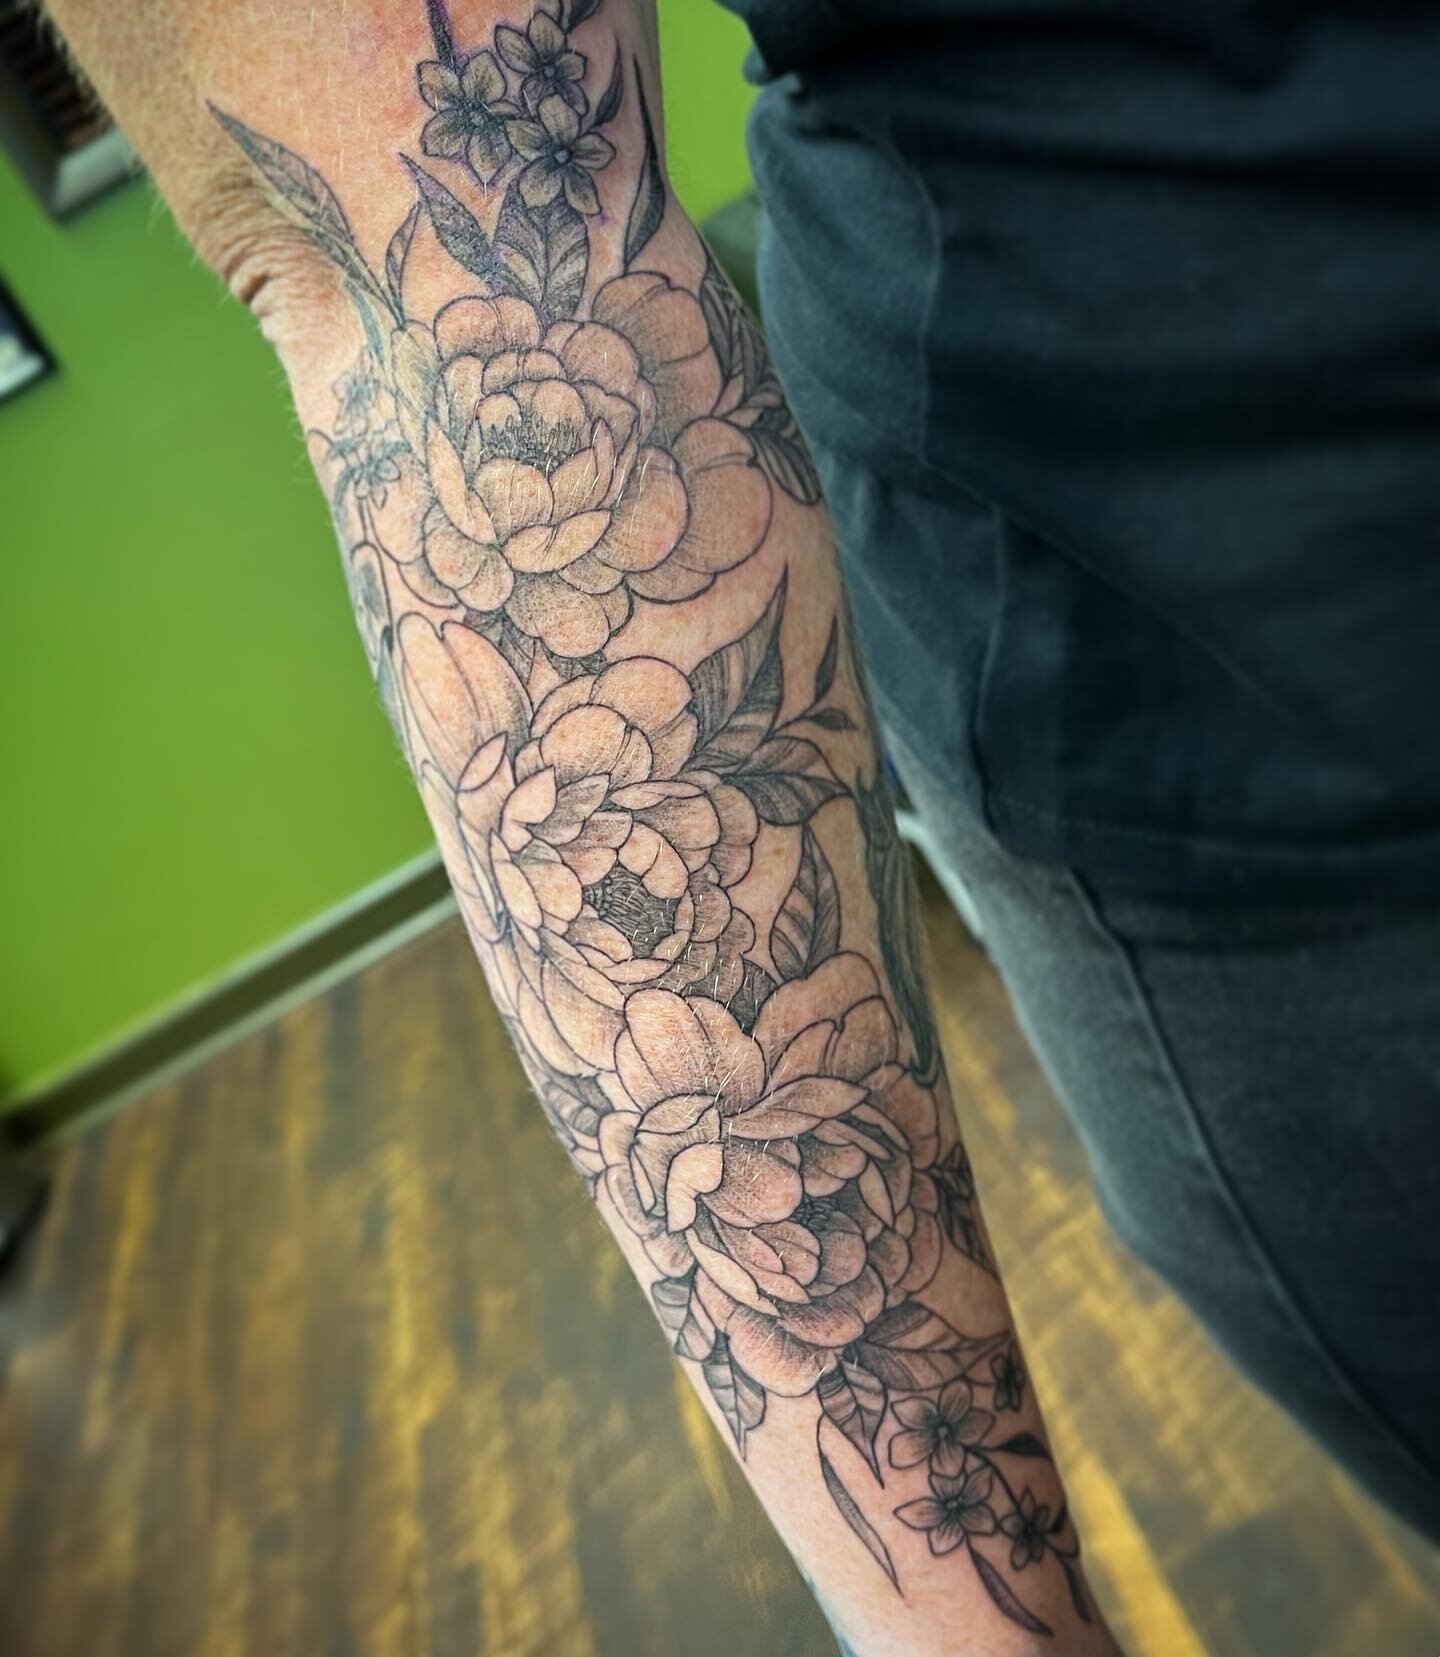 Beautiful peonies by Ainsley @ainsleyvtattoo! To book or inquire please email us at gypsykingstattoos@gmail.com
.
.
.
.
 #tattoos #southeastmichigan #southeastmi #mitattooartist #detroittattooartist #MItattoo #tattooshop #flowers #flowertattoo #peoni